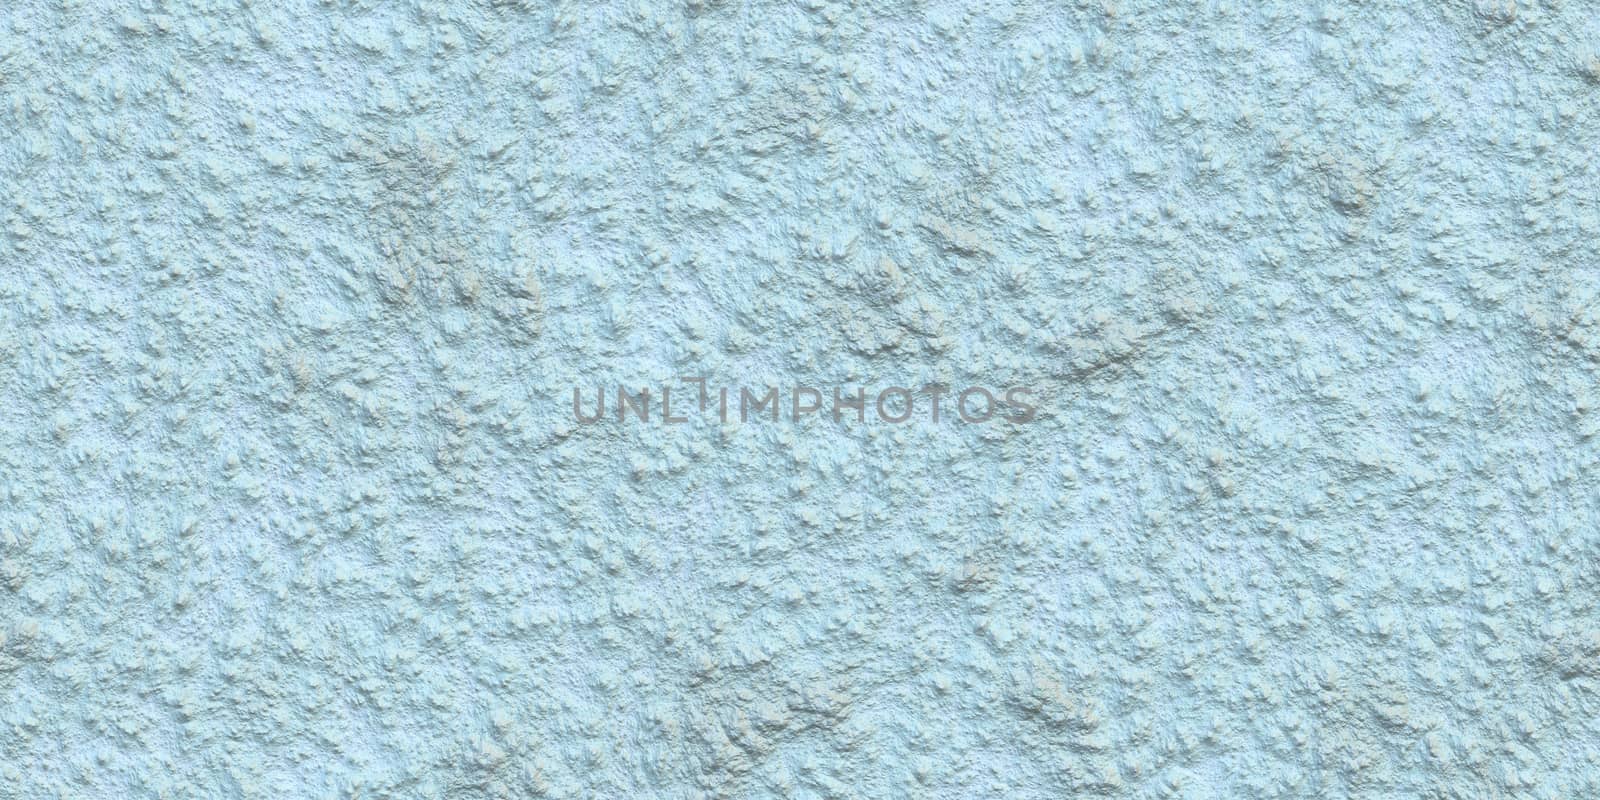 Sky Blue Seamless Spray Plaster Texture. Light Plastering White Wall Background. Decorative Building Exterior Backdrop.